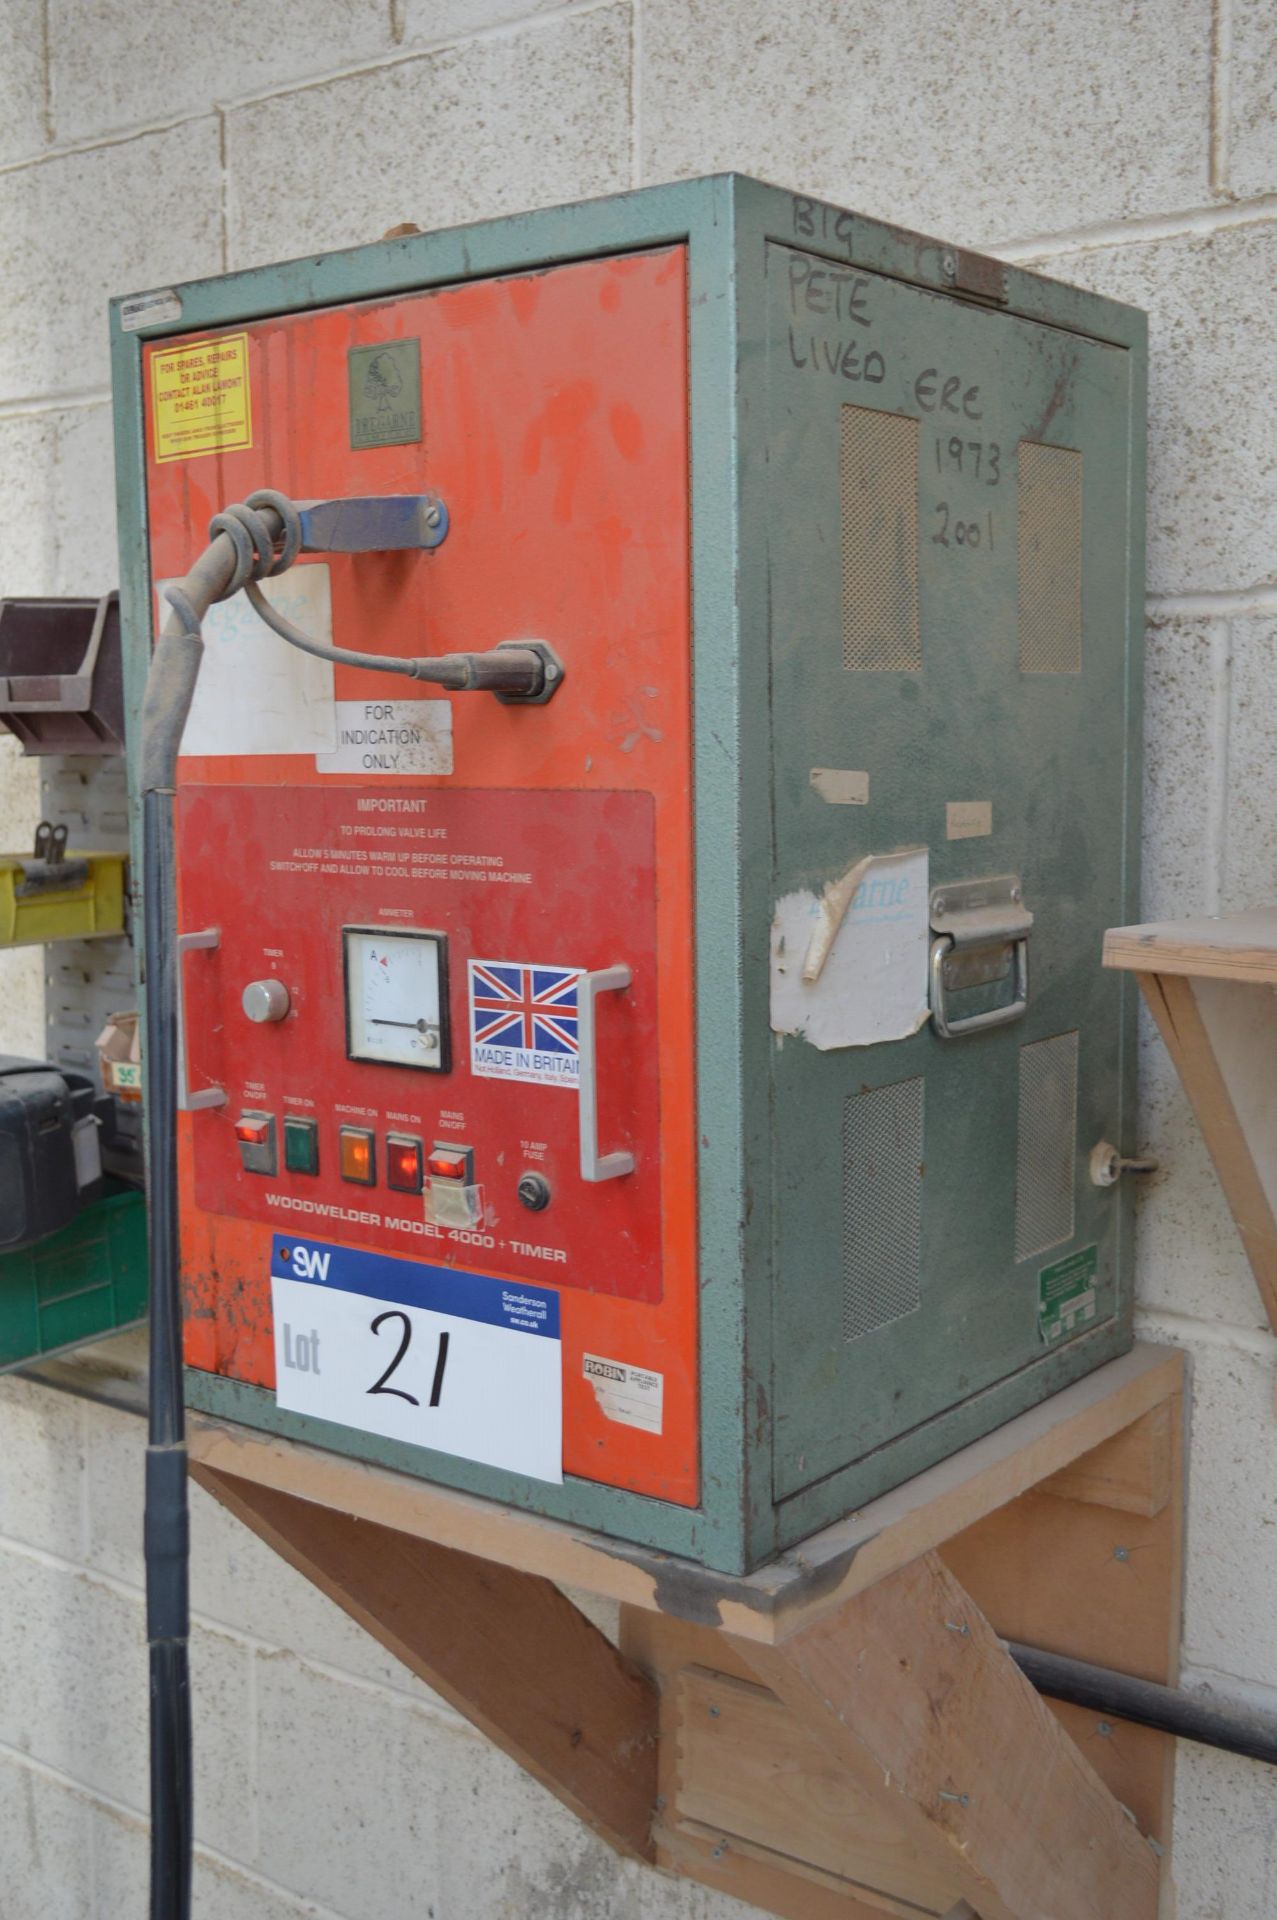 Tregarne 4000 RF Wood Welder, with timer, serial no. 99003/4T, 230V, operating frequency 27.12 - Image 2 of 3